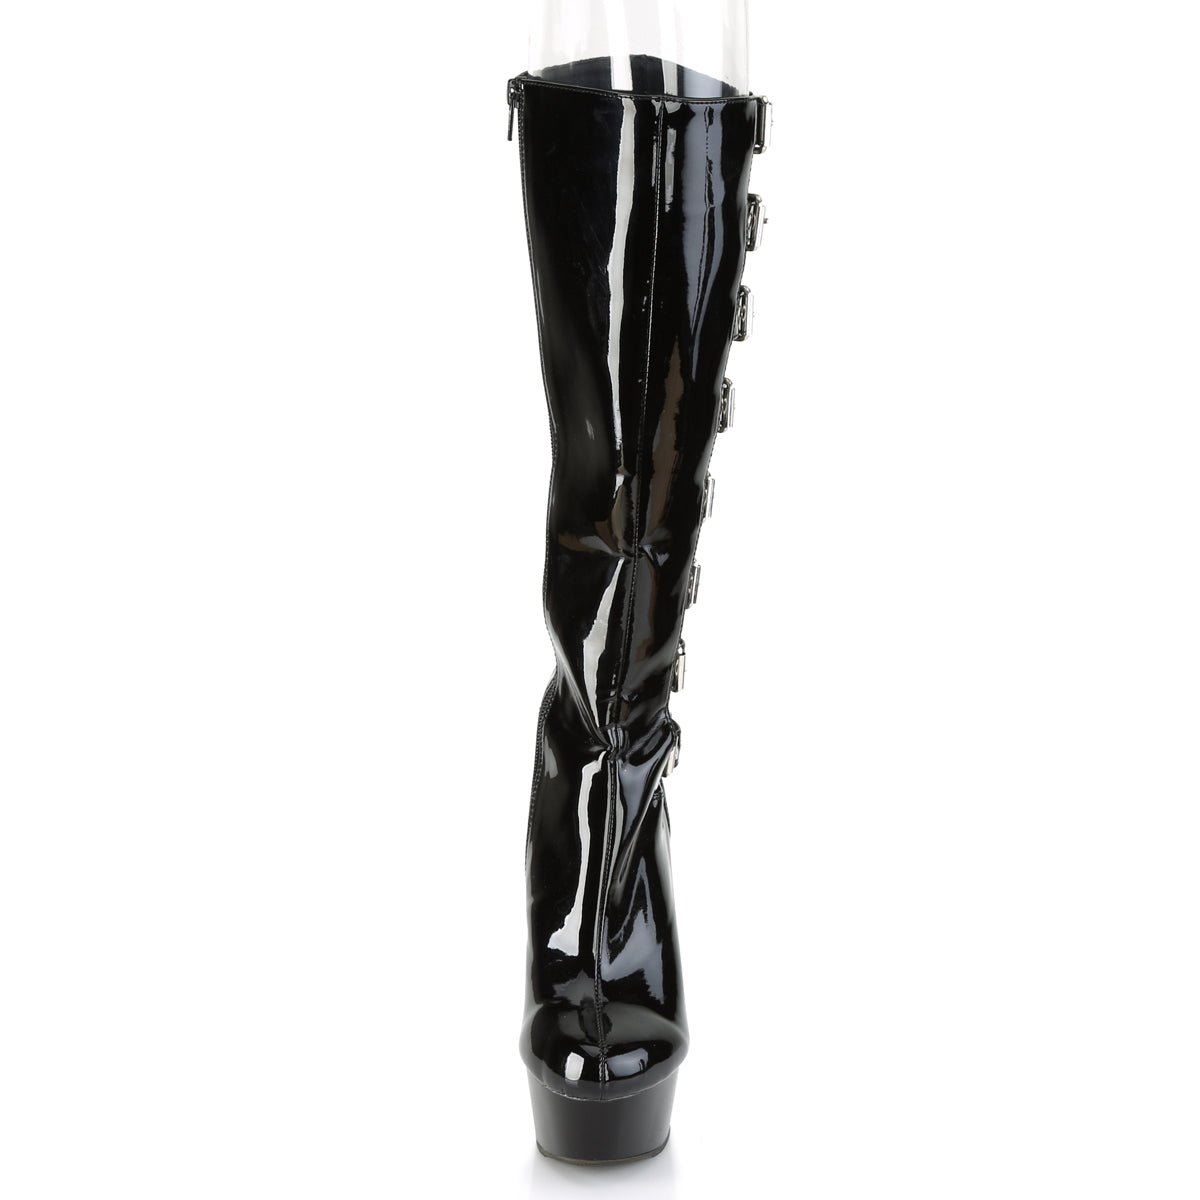 DELIGHT-2047 Pleaser Black Patent Platform Shoes [Sexy Knee High Boots]